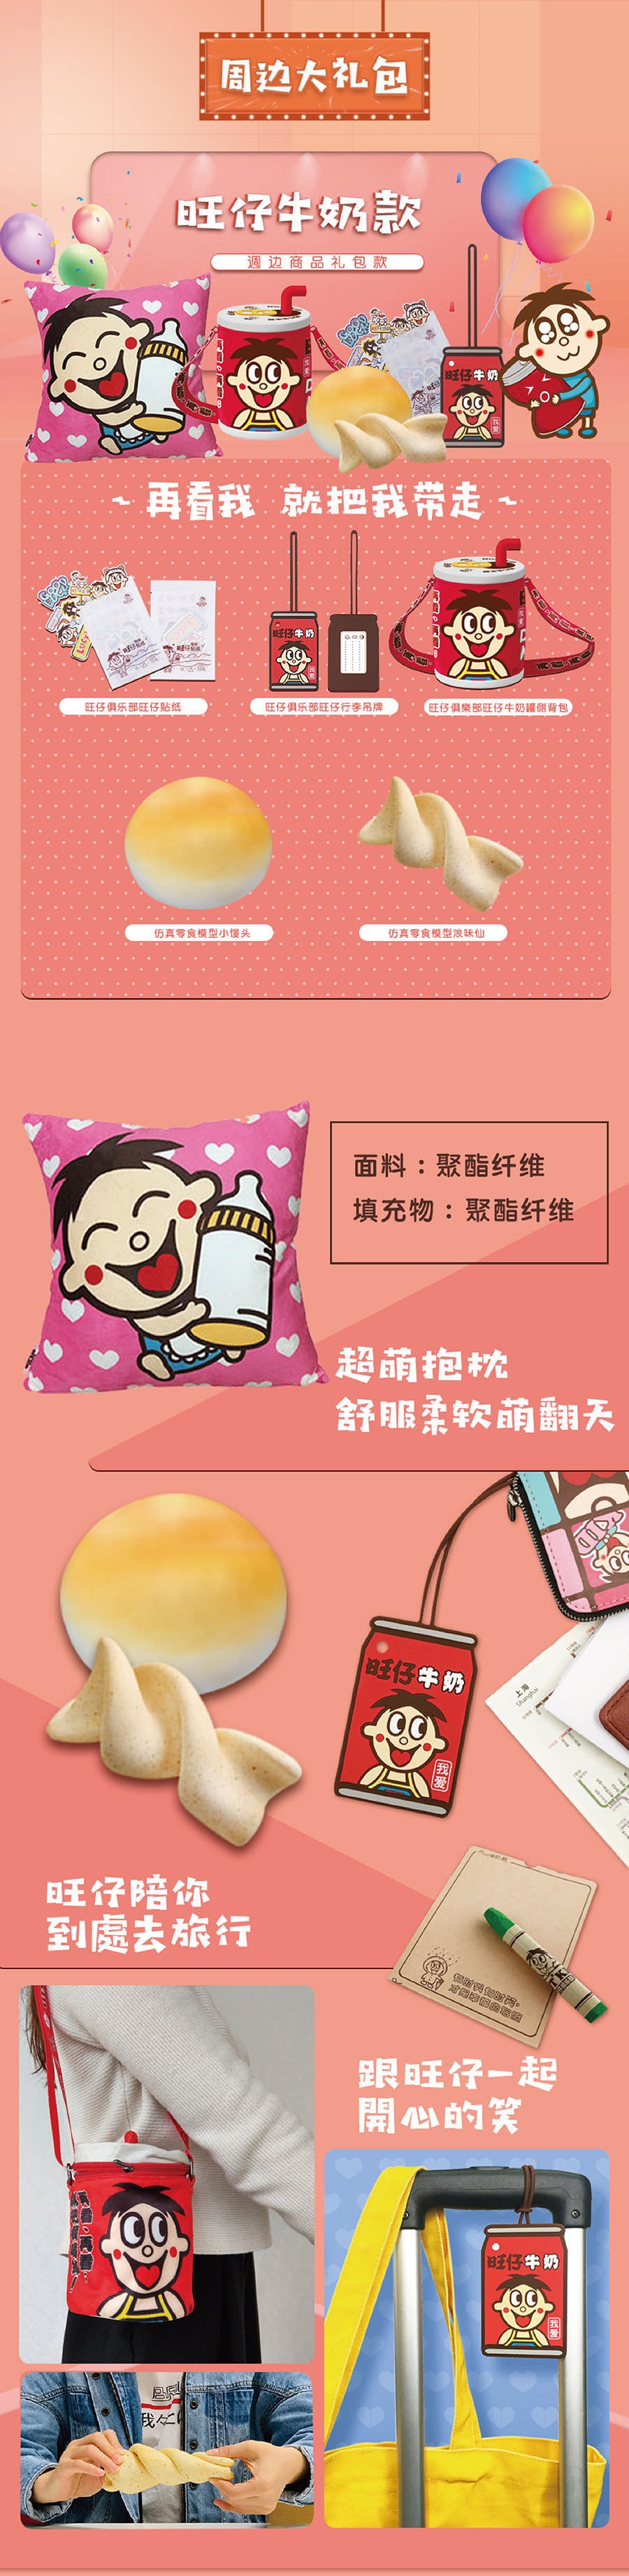 Taiwan Hot Kids Merchandise Bundle - Luggage Tag/Stickers/Shoulder Bag/Baby Pink Pillow/Relax Toy